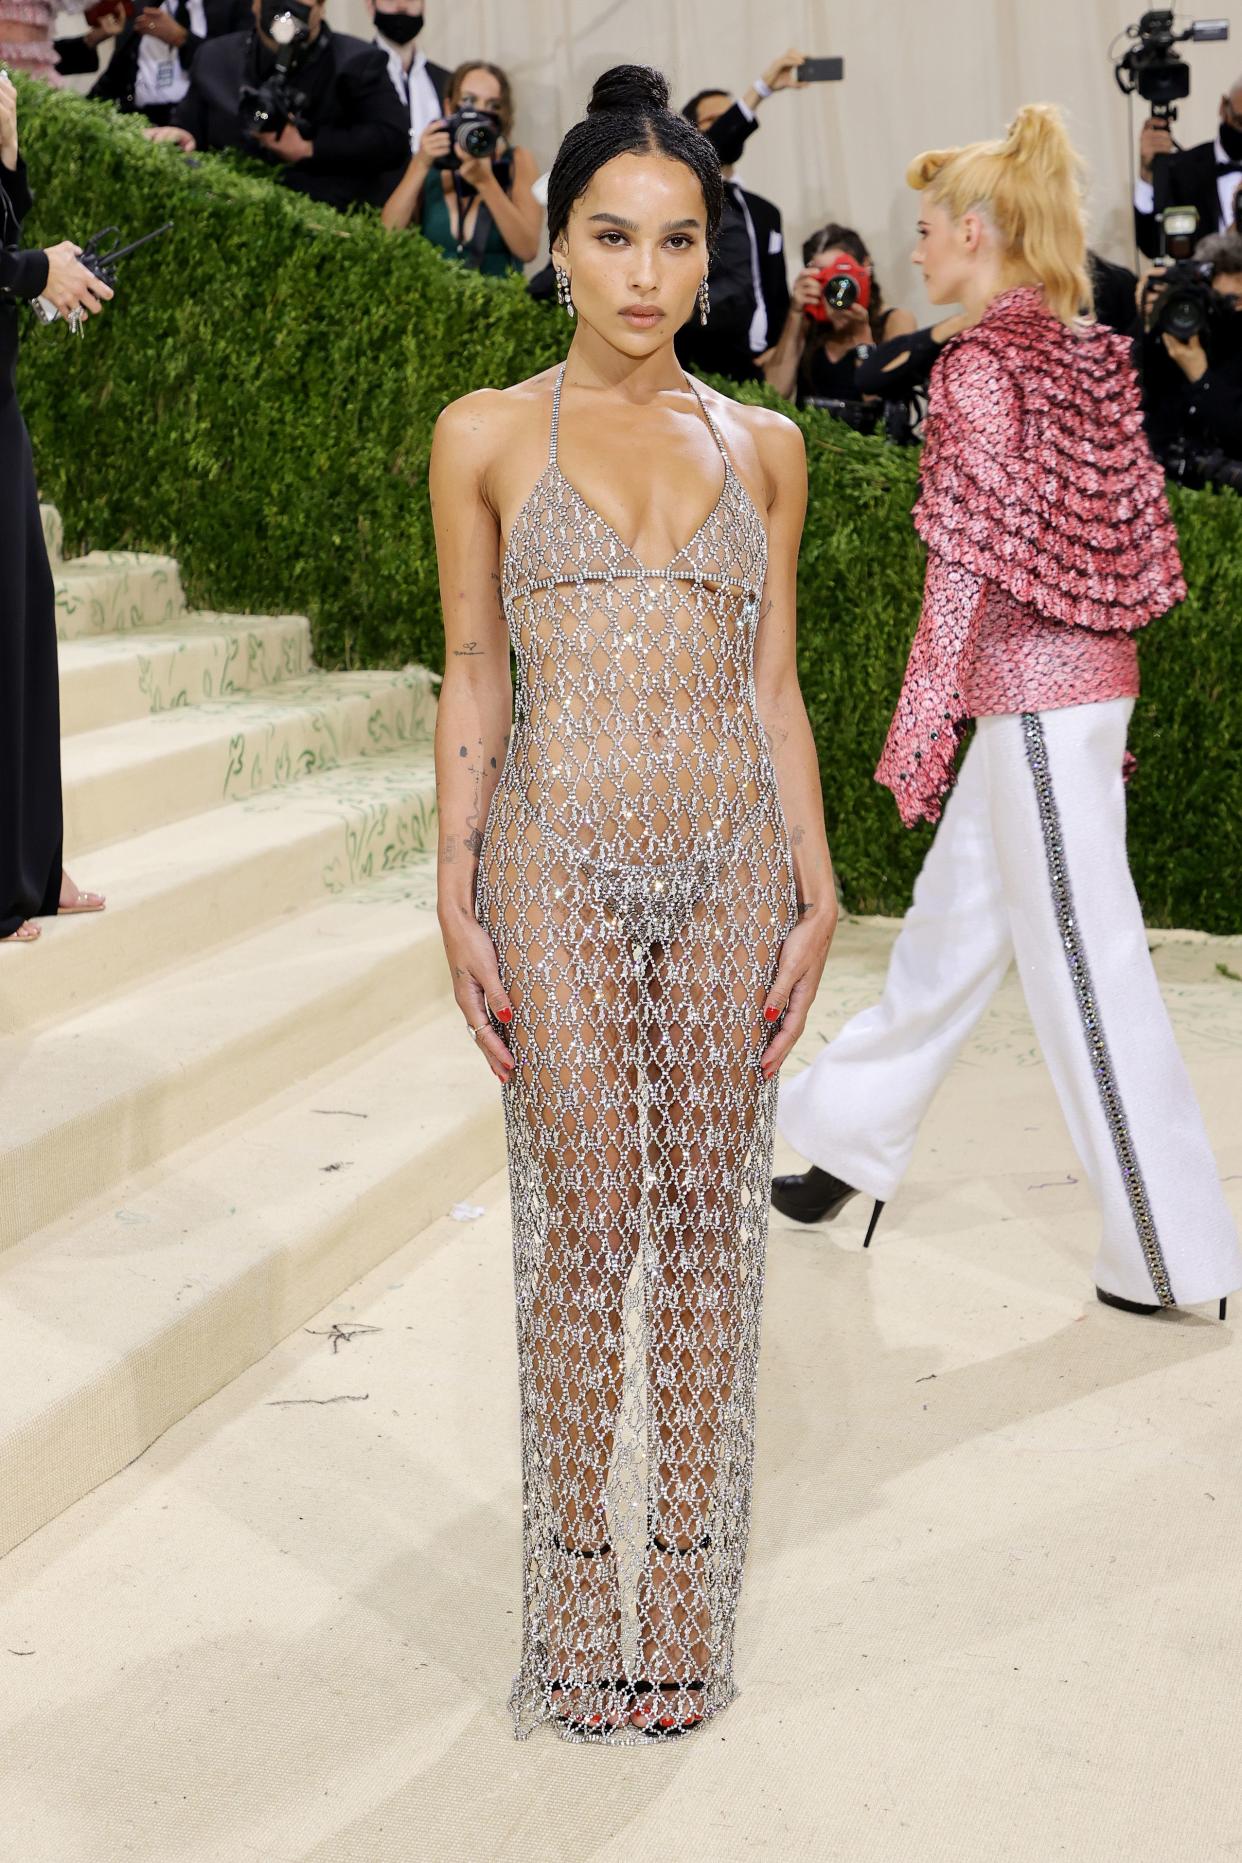 Zoë Kravitz attends The 2021 Met Gala Celebrating In America: A Lexicon Of Fashion at Metropolitan Museum of Art on Sept. 13, 2021 in New York.